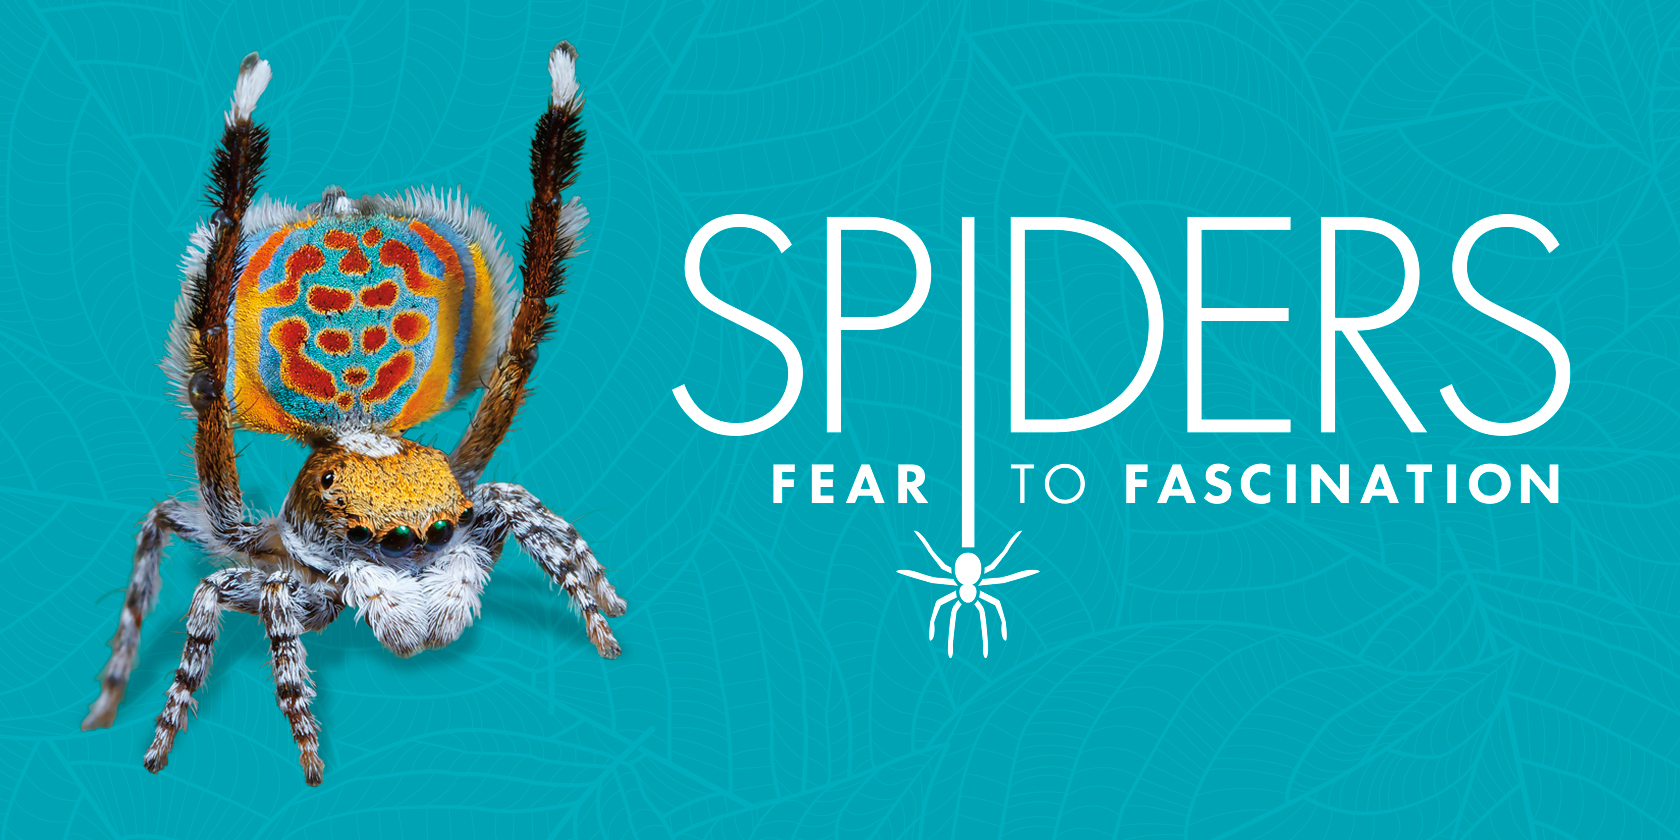 Spiders: Fear to Fascination. A peacock spider shows off its brilliant coloration against a teal background.